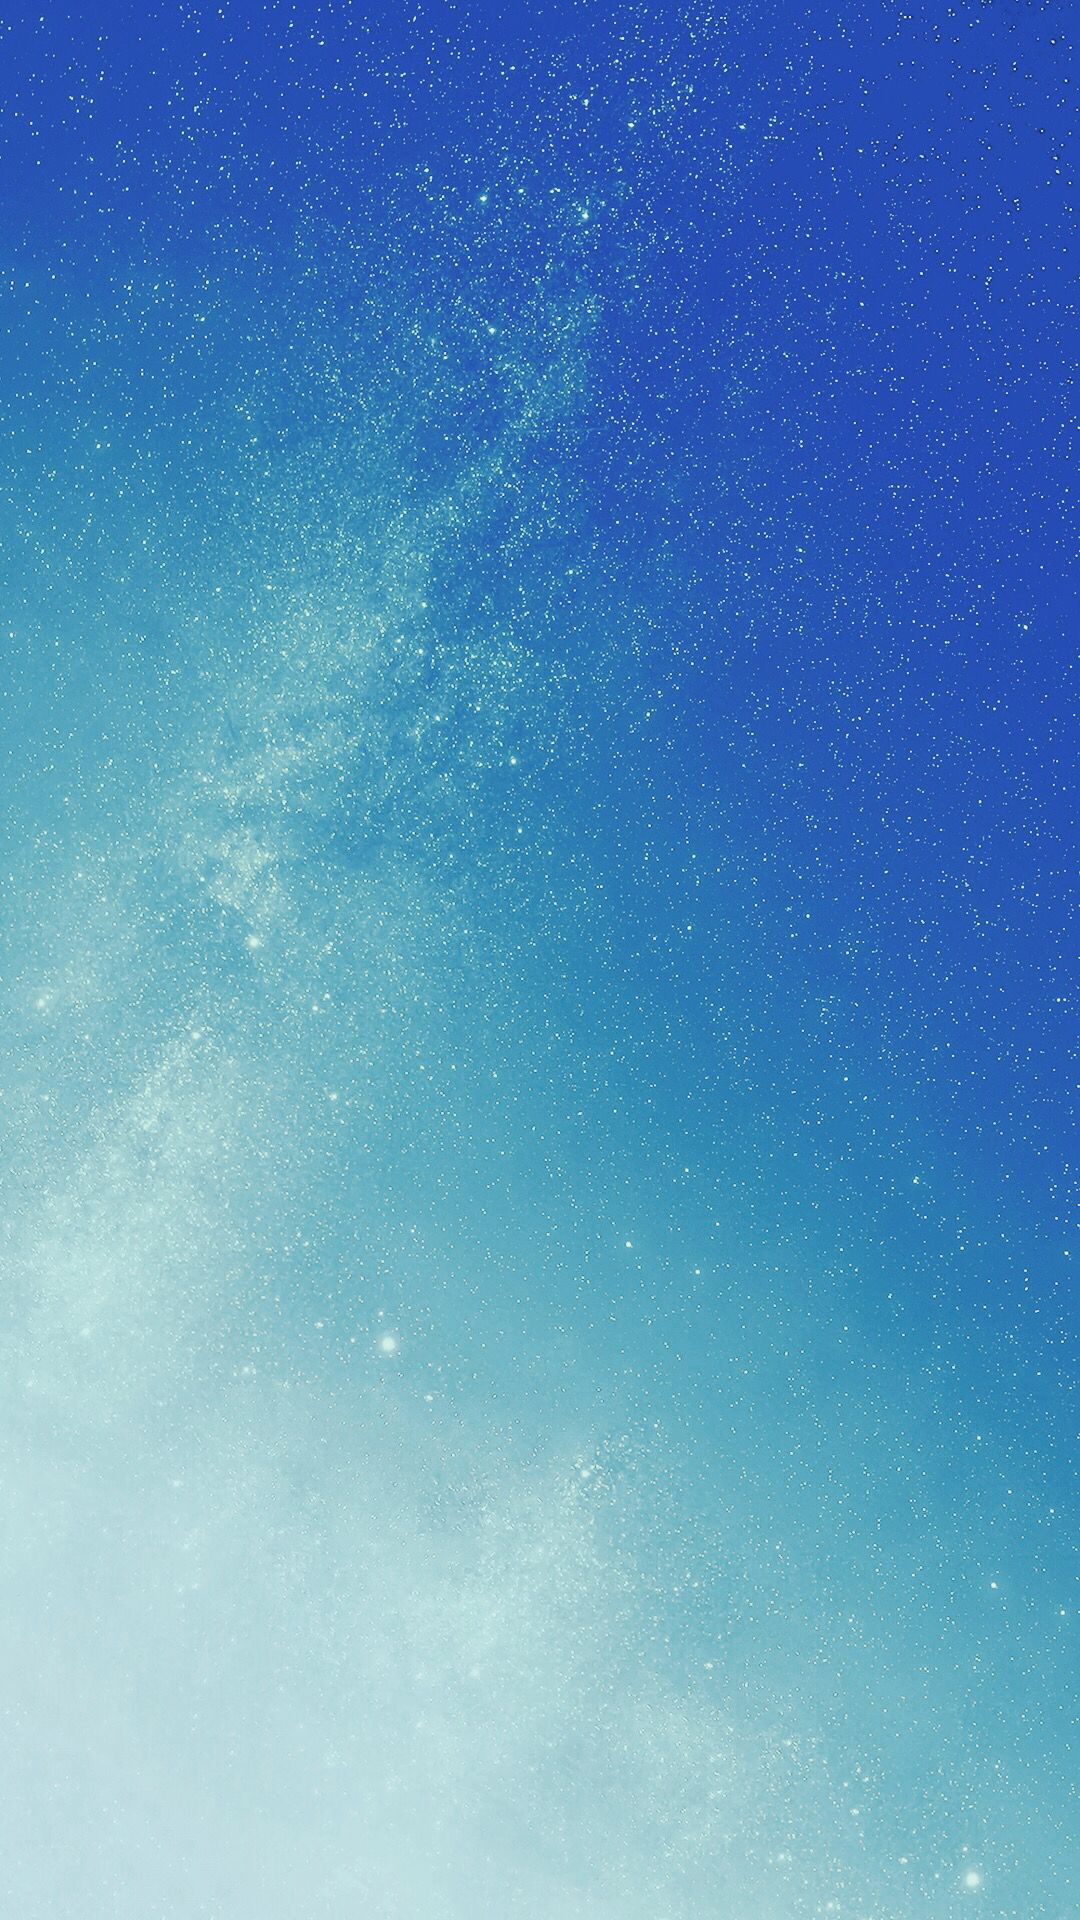 Сute Blue iPhone Wallpapers: 20+ Image, Category